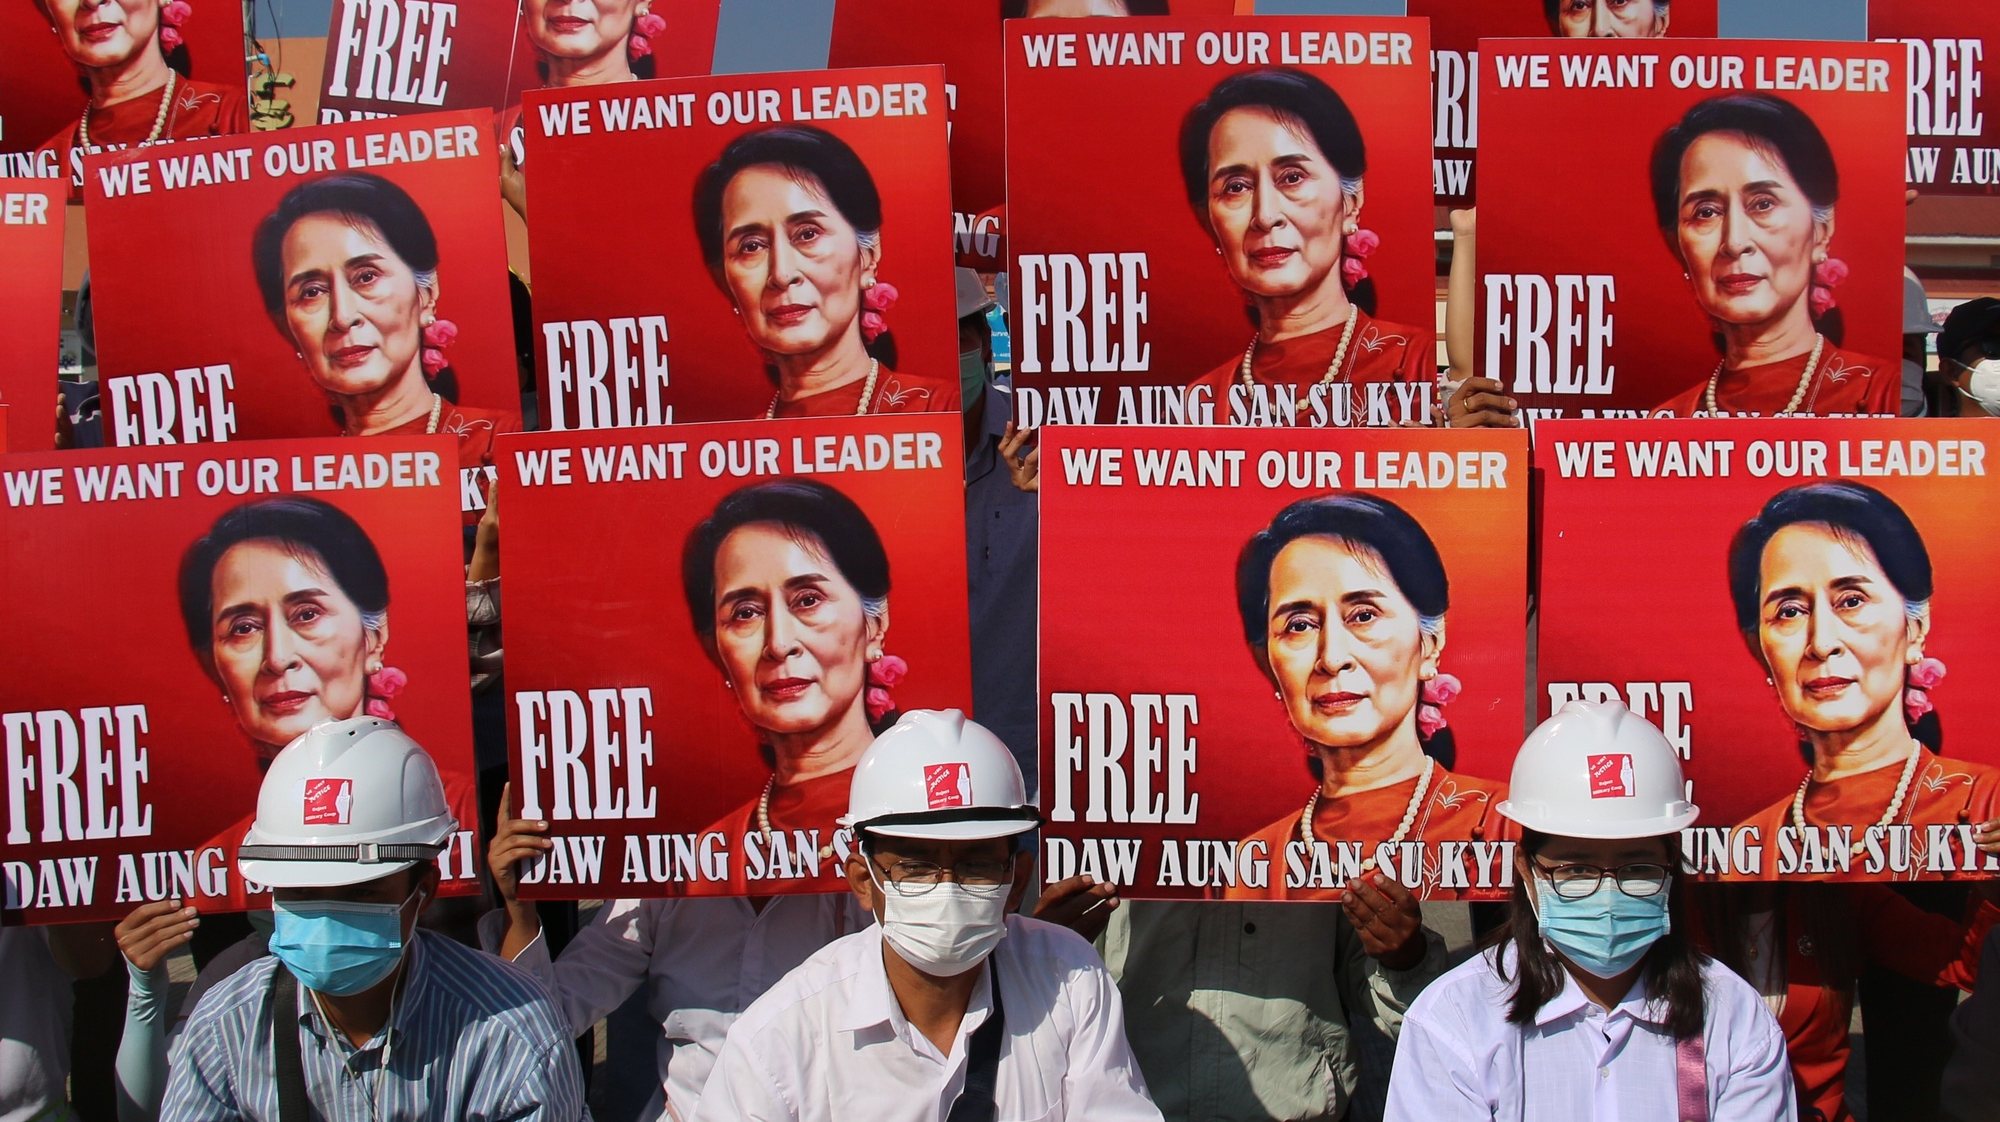 epa09269323 (FILE) - Demonstrators hold up placards calling for the release of detained Myanmar State Counselor Aung San Suu Kyi during a protest against the military coup in Naypyitaw, Myanmar, 15 February 2021(reissued 14 June 2021). The trial of deposed leader Aung San Suu Kyi will hear its first testimony in court on 14 June 2021. Aung San Suu Kyi was detained in February 2021 after her government was overthrown by the military in a coup.  EPA/STRINGER